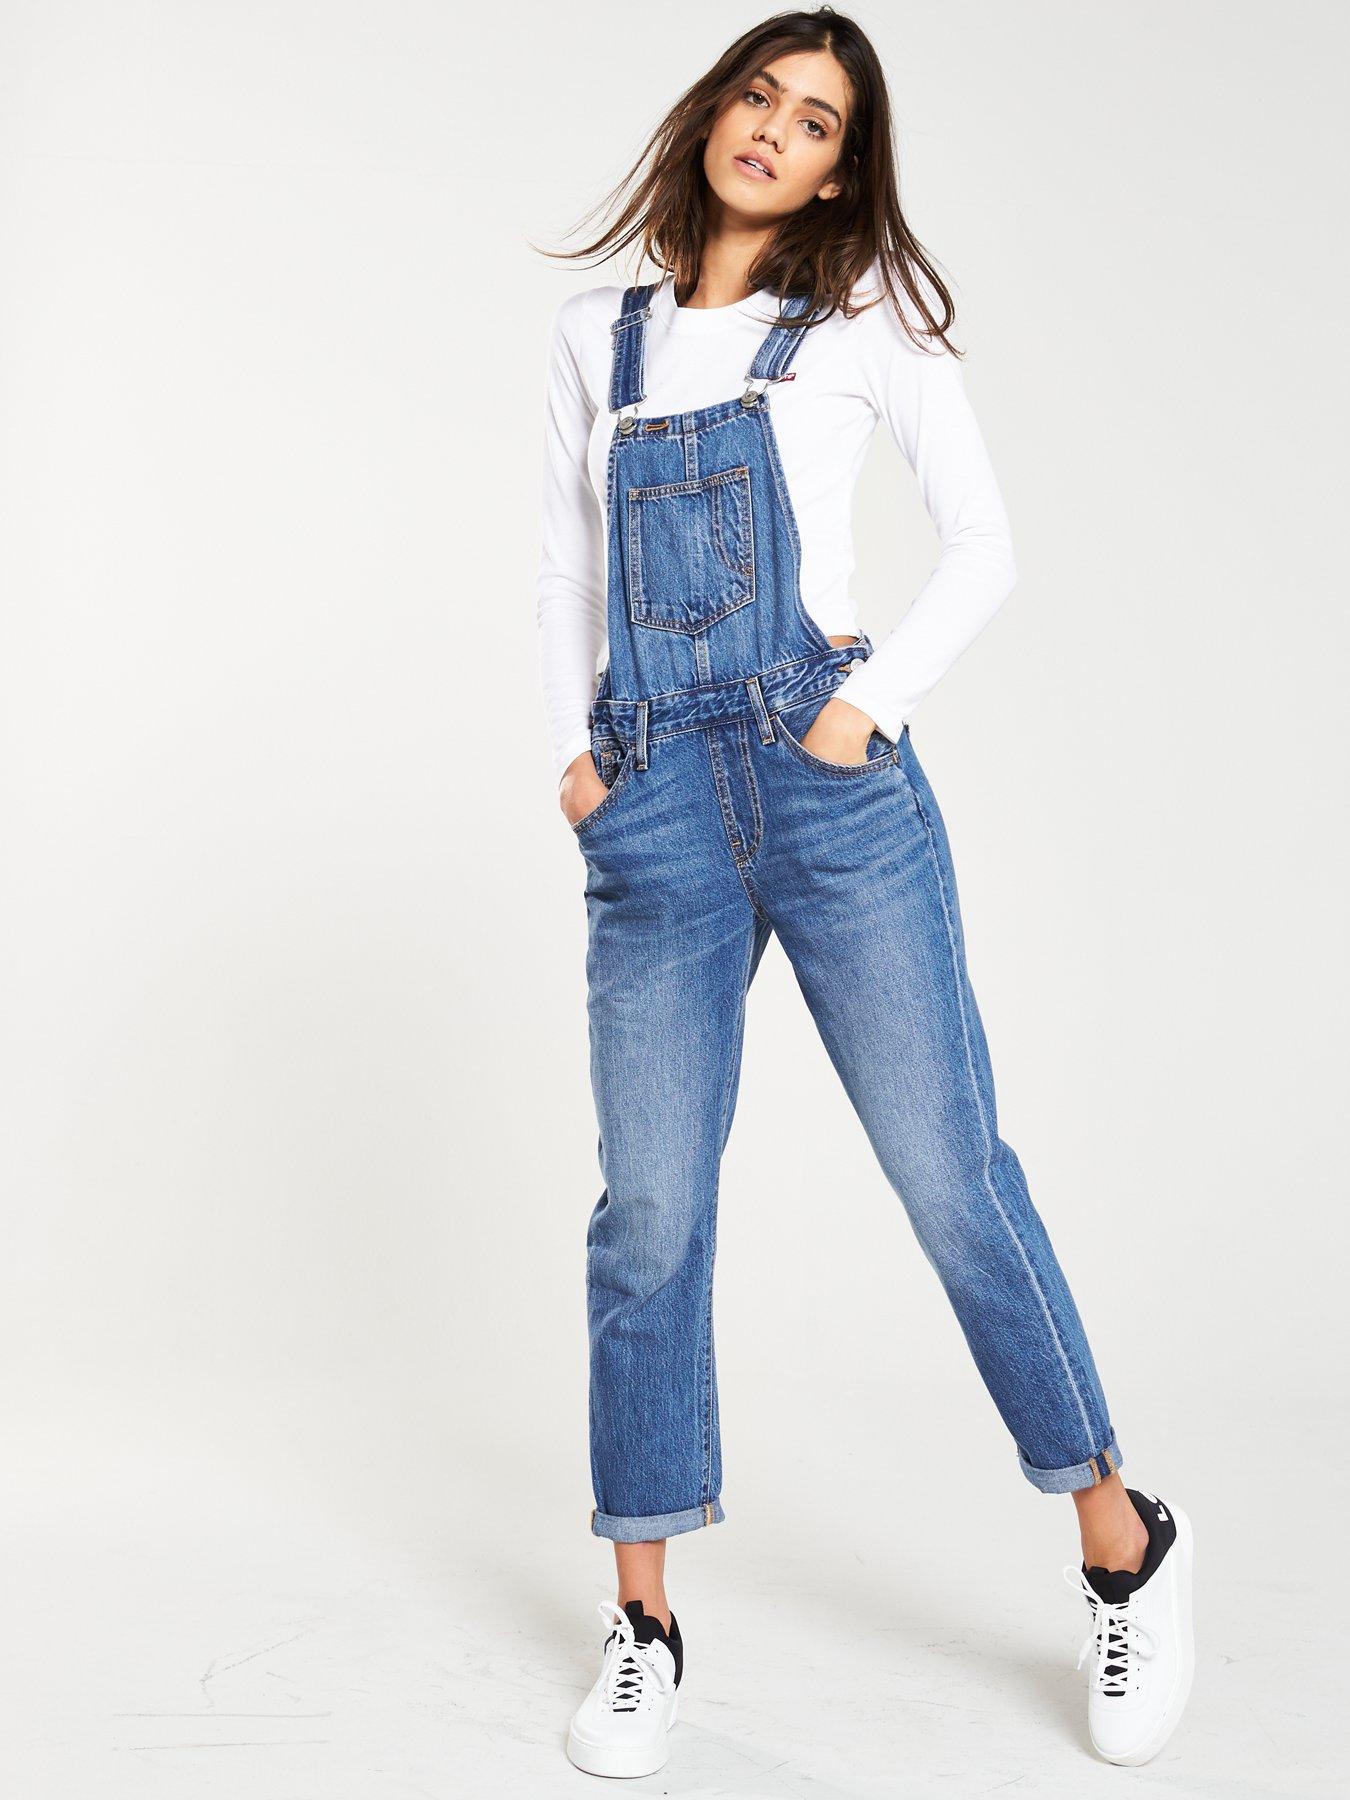 levis dungarees womens uk